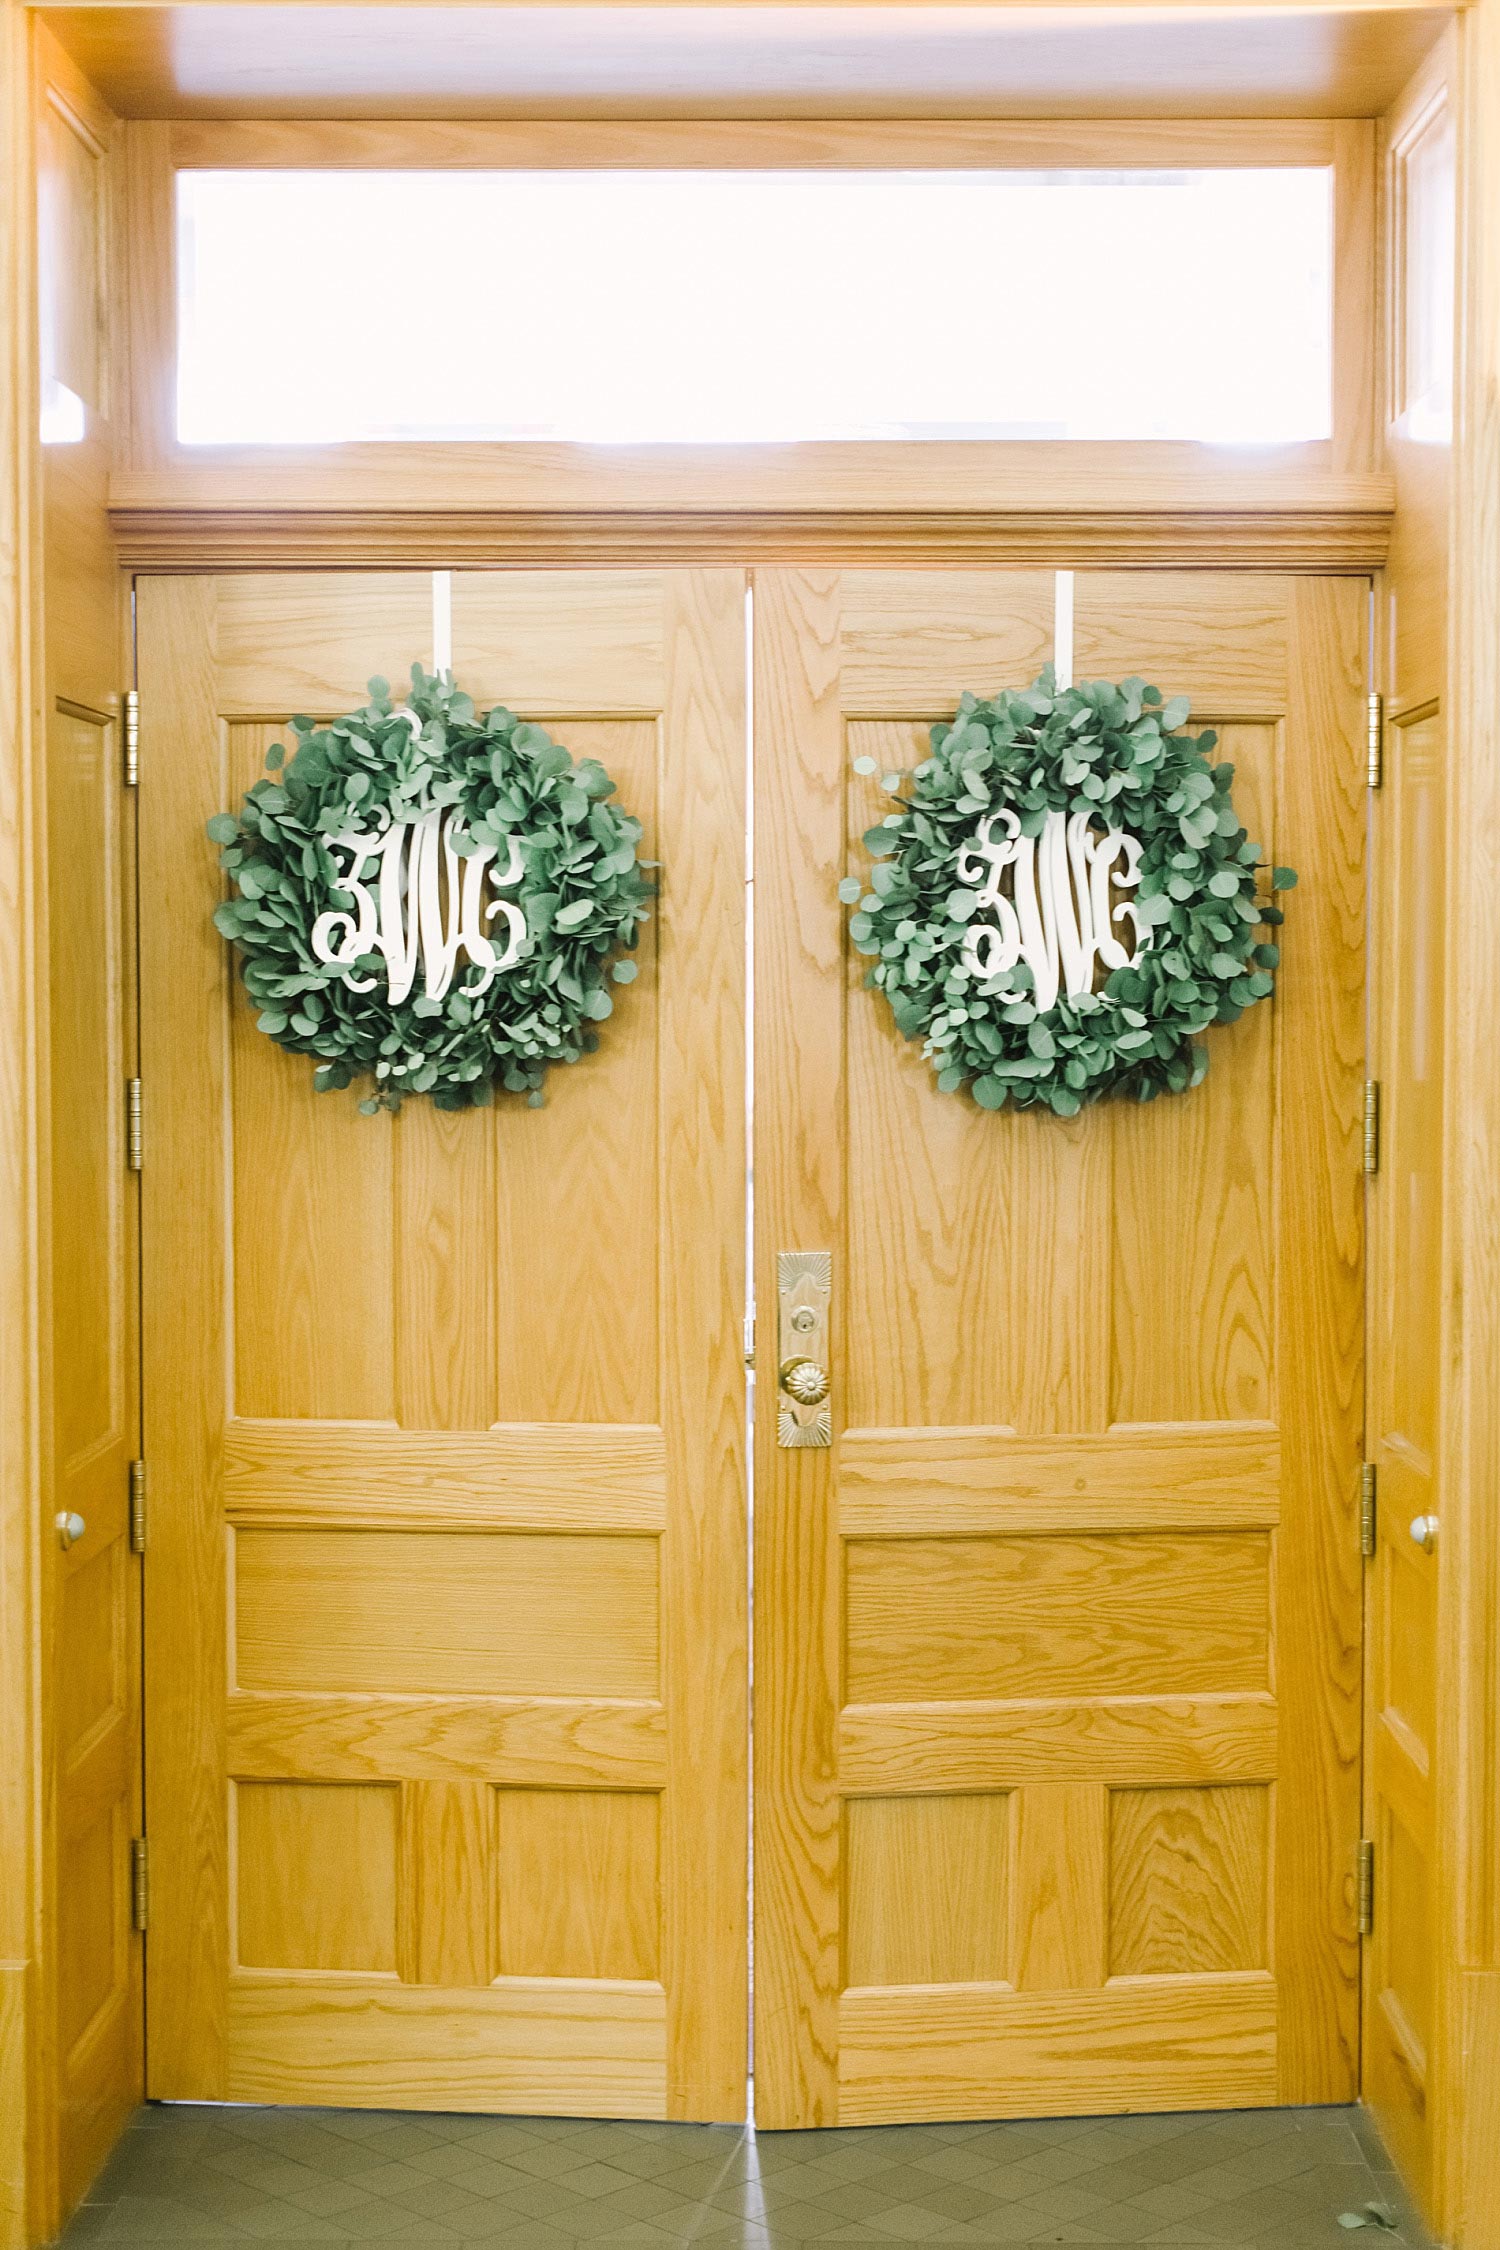 Old Red Museum wreaths on the ceremony doors with monograms in center